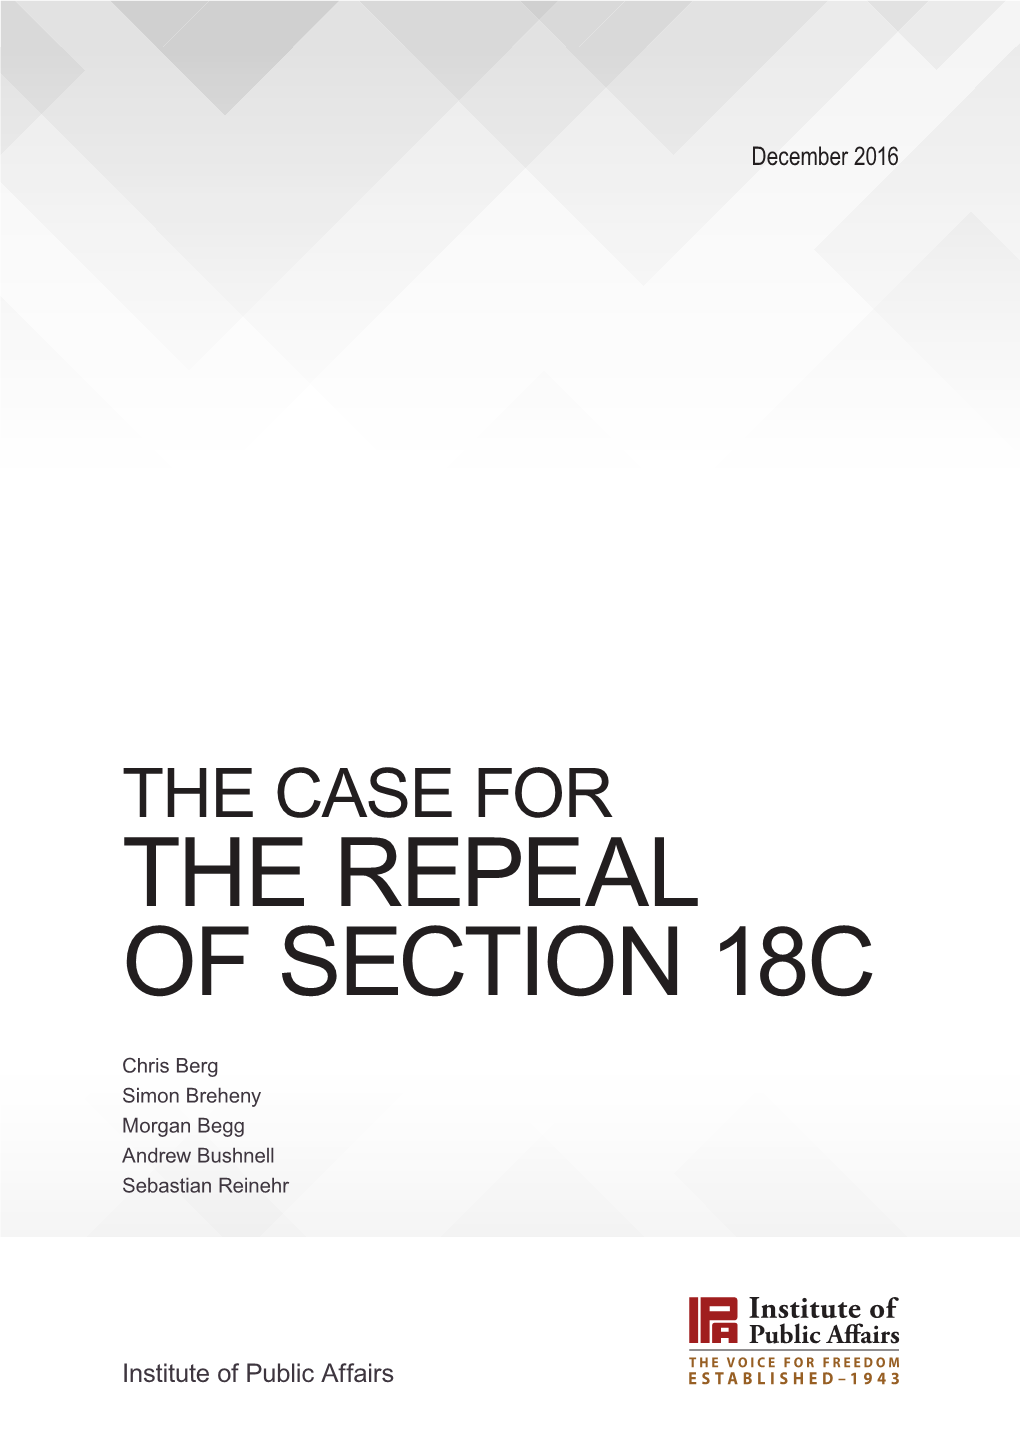 The Case for the Repeal of Section 18C